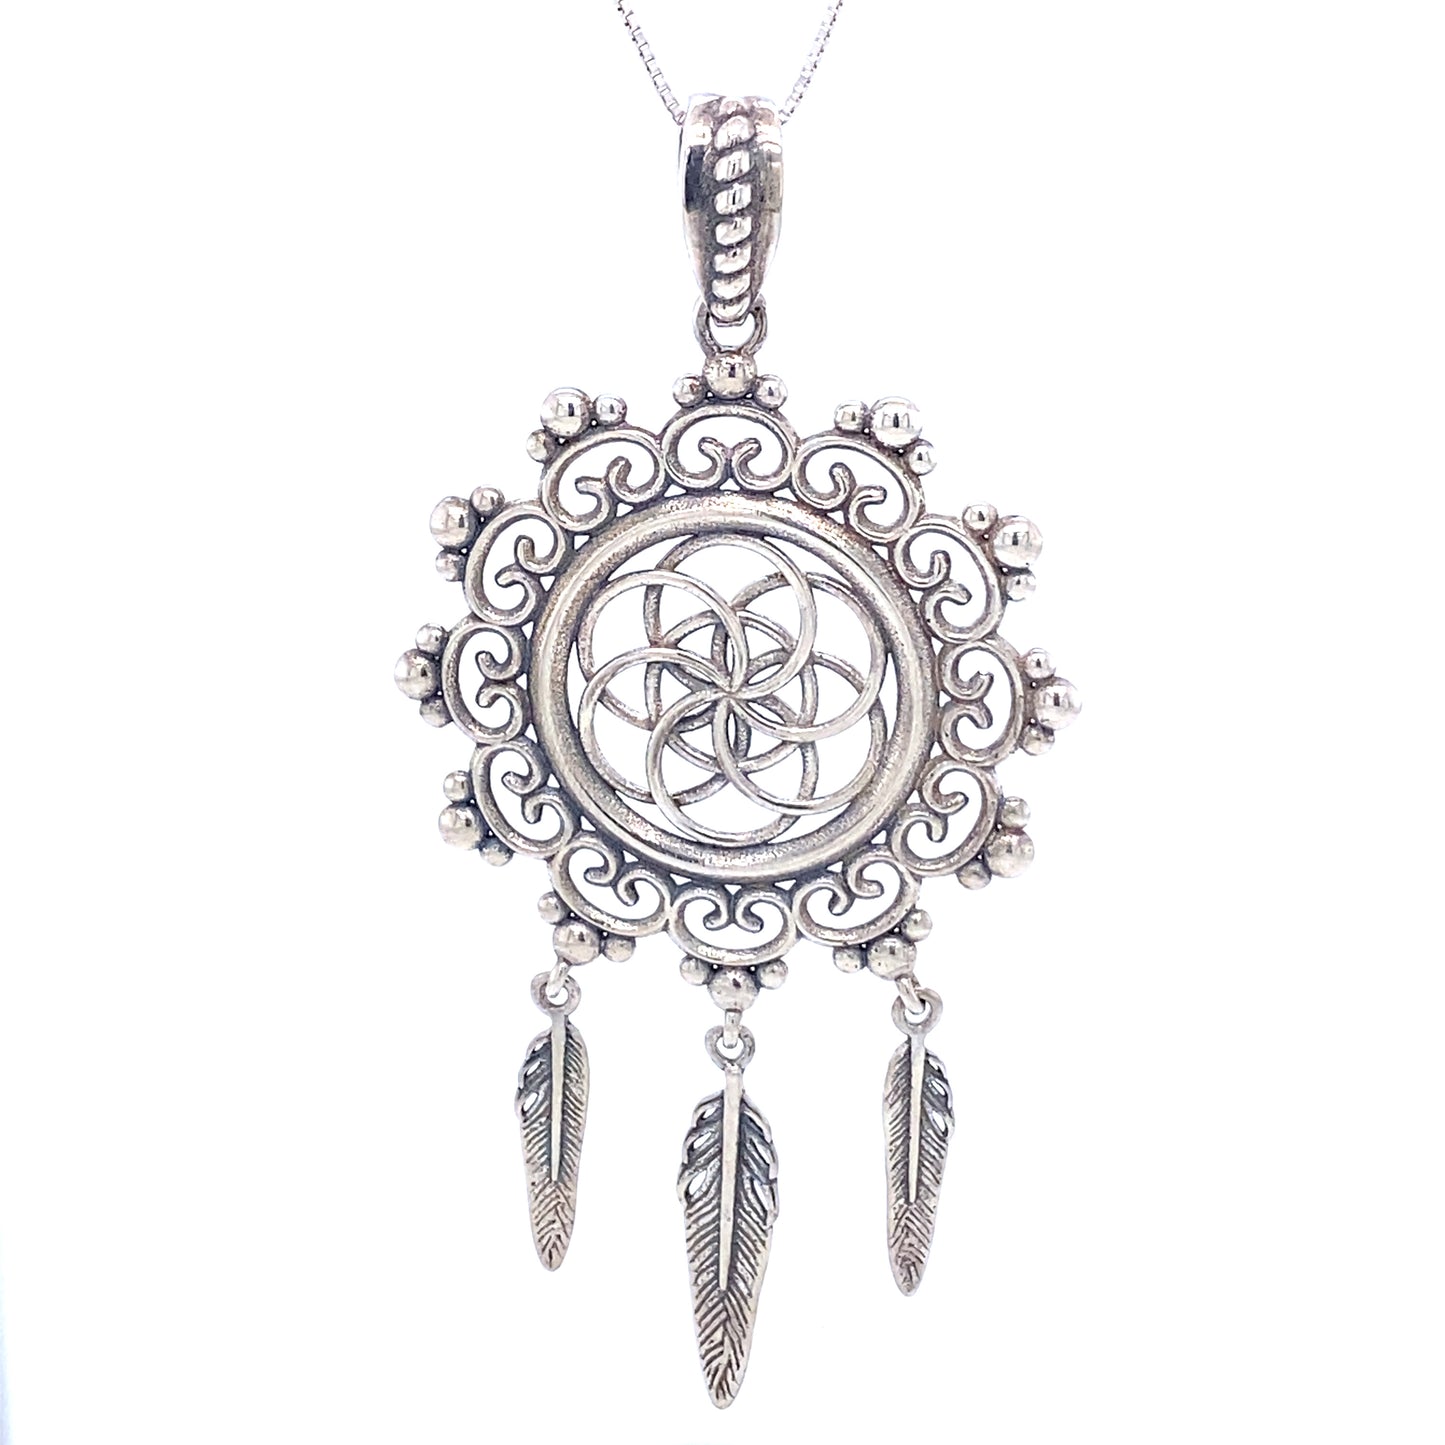 A long Flower of Life Mandala pendant with feathers made of .925 Sterling Silver by Super Silver.